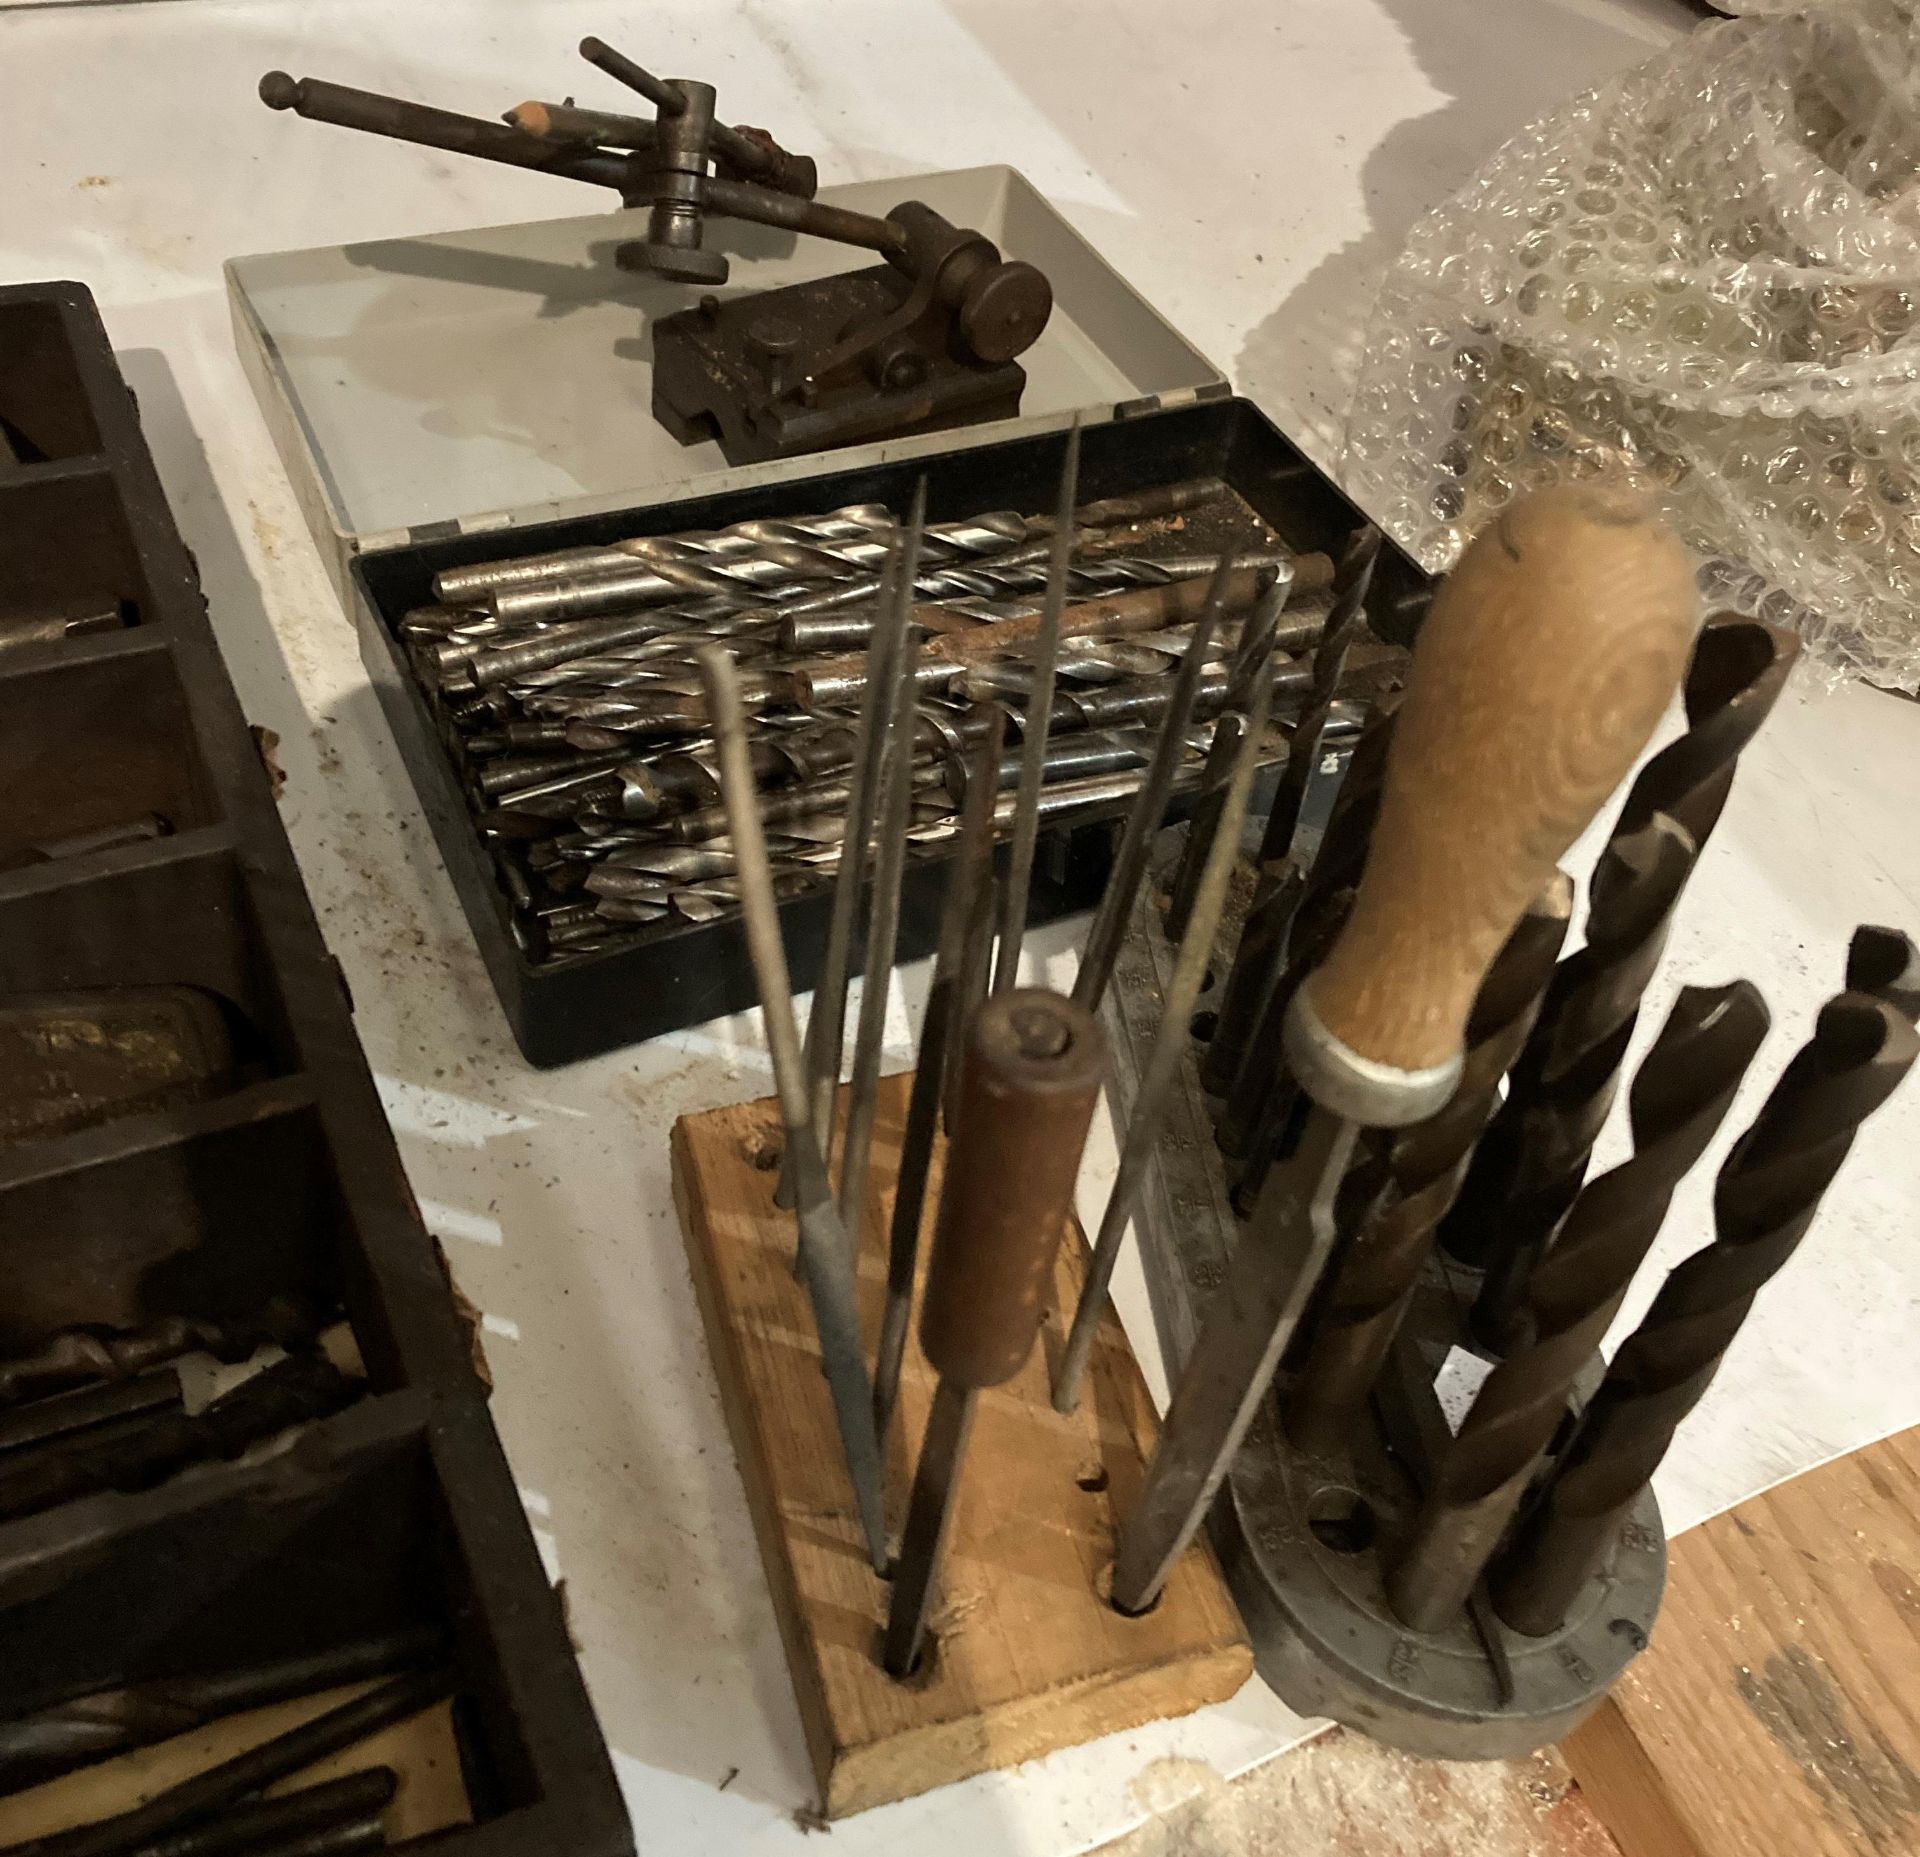 Contents to wooden tray - assorted tap and die bits, metal drill bit stand, files, - Image 3 of 3